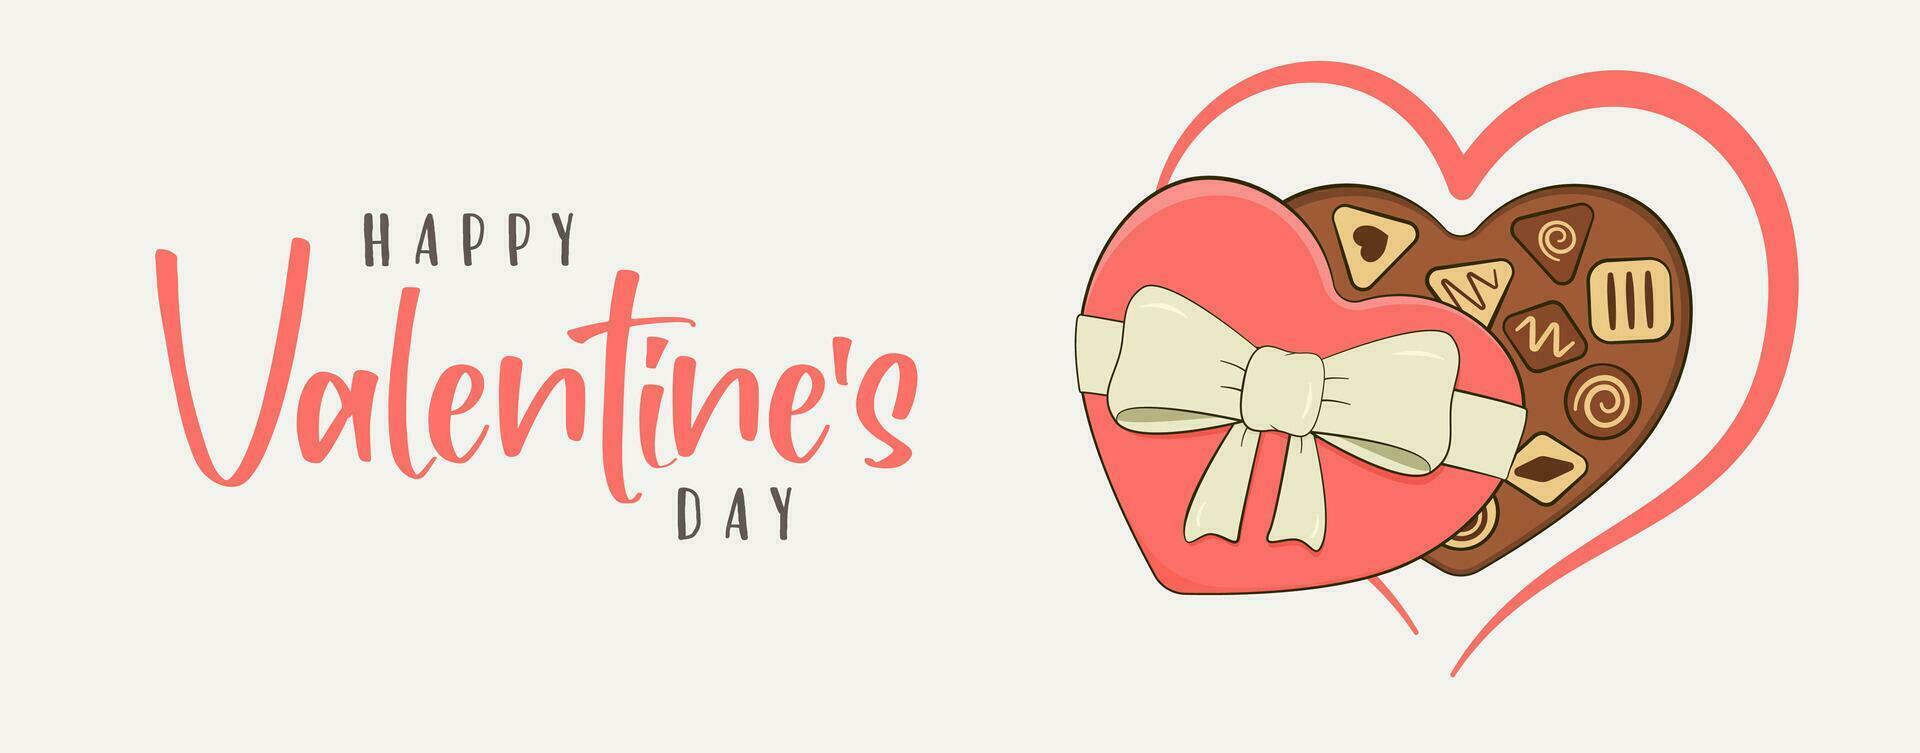 Happy Valentine's Day, lettering. Banner. Chocolate candy with heart-shaped box vector